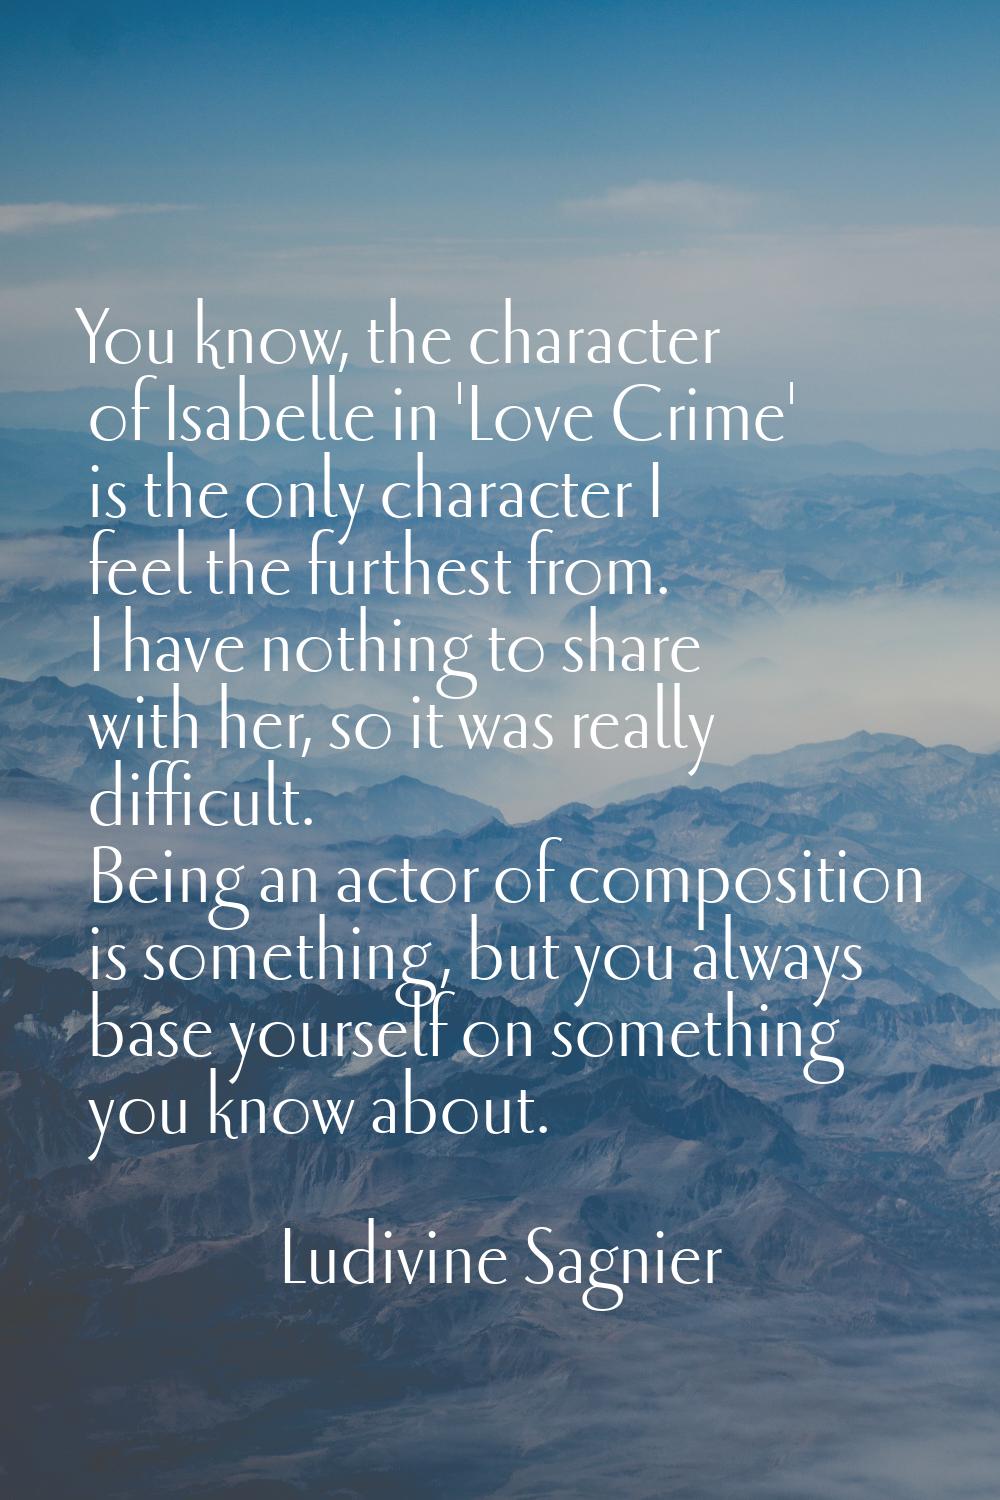 You know, the character of Isabelle in 'Love Crime' is the only character I feel the furthest from.